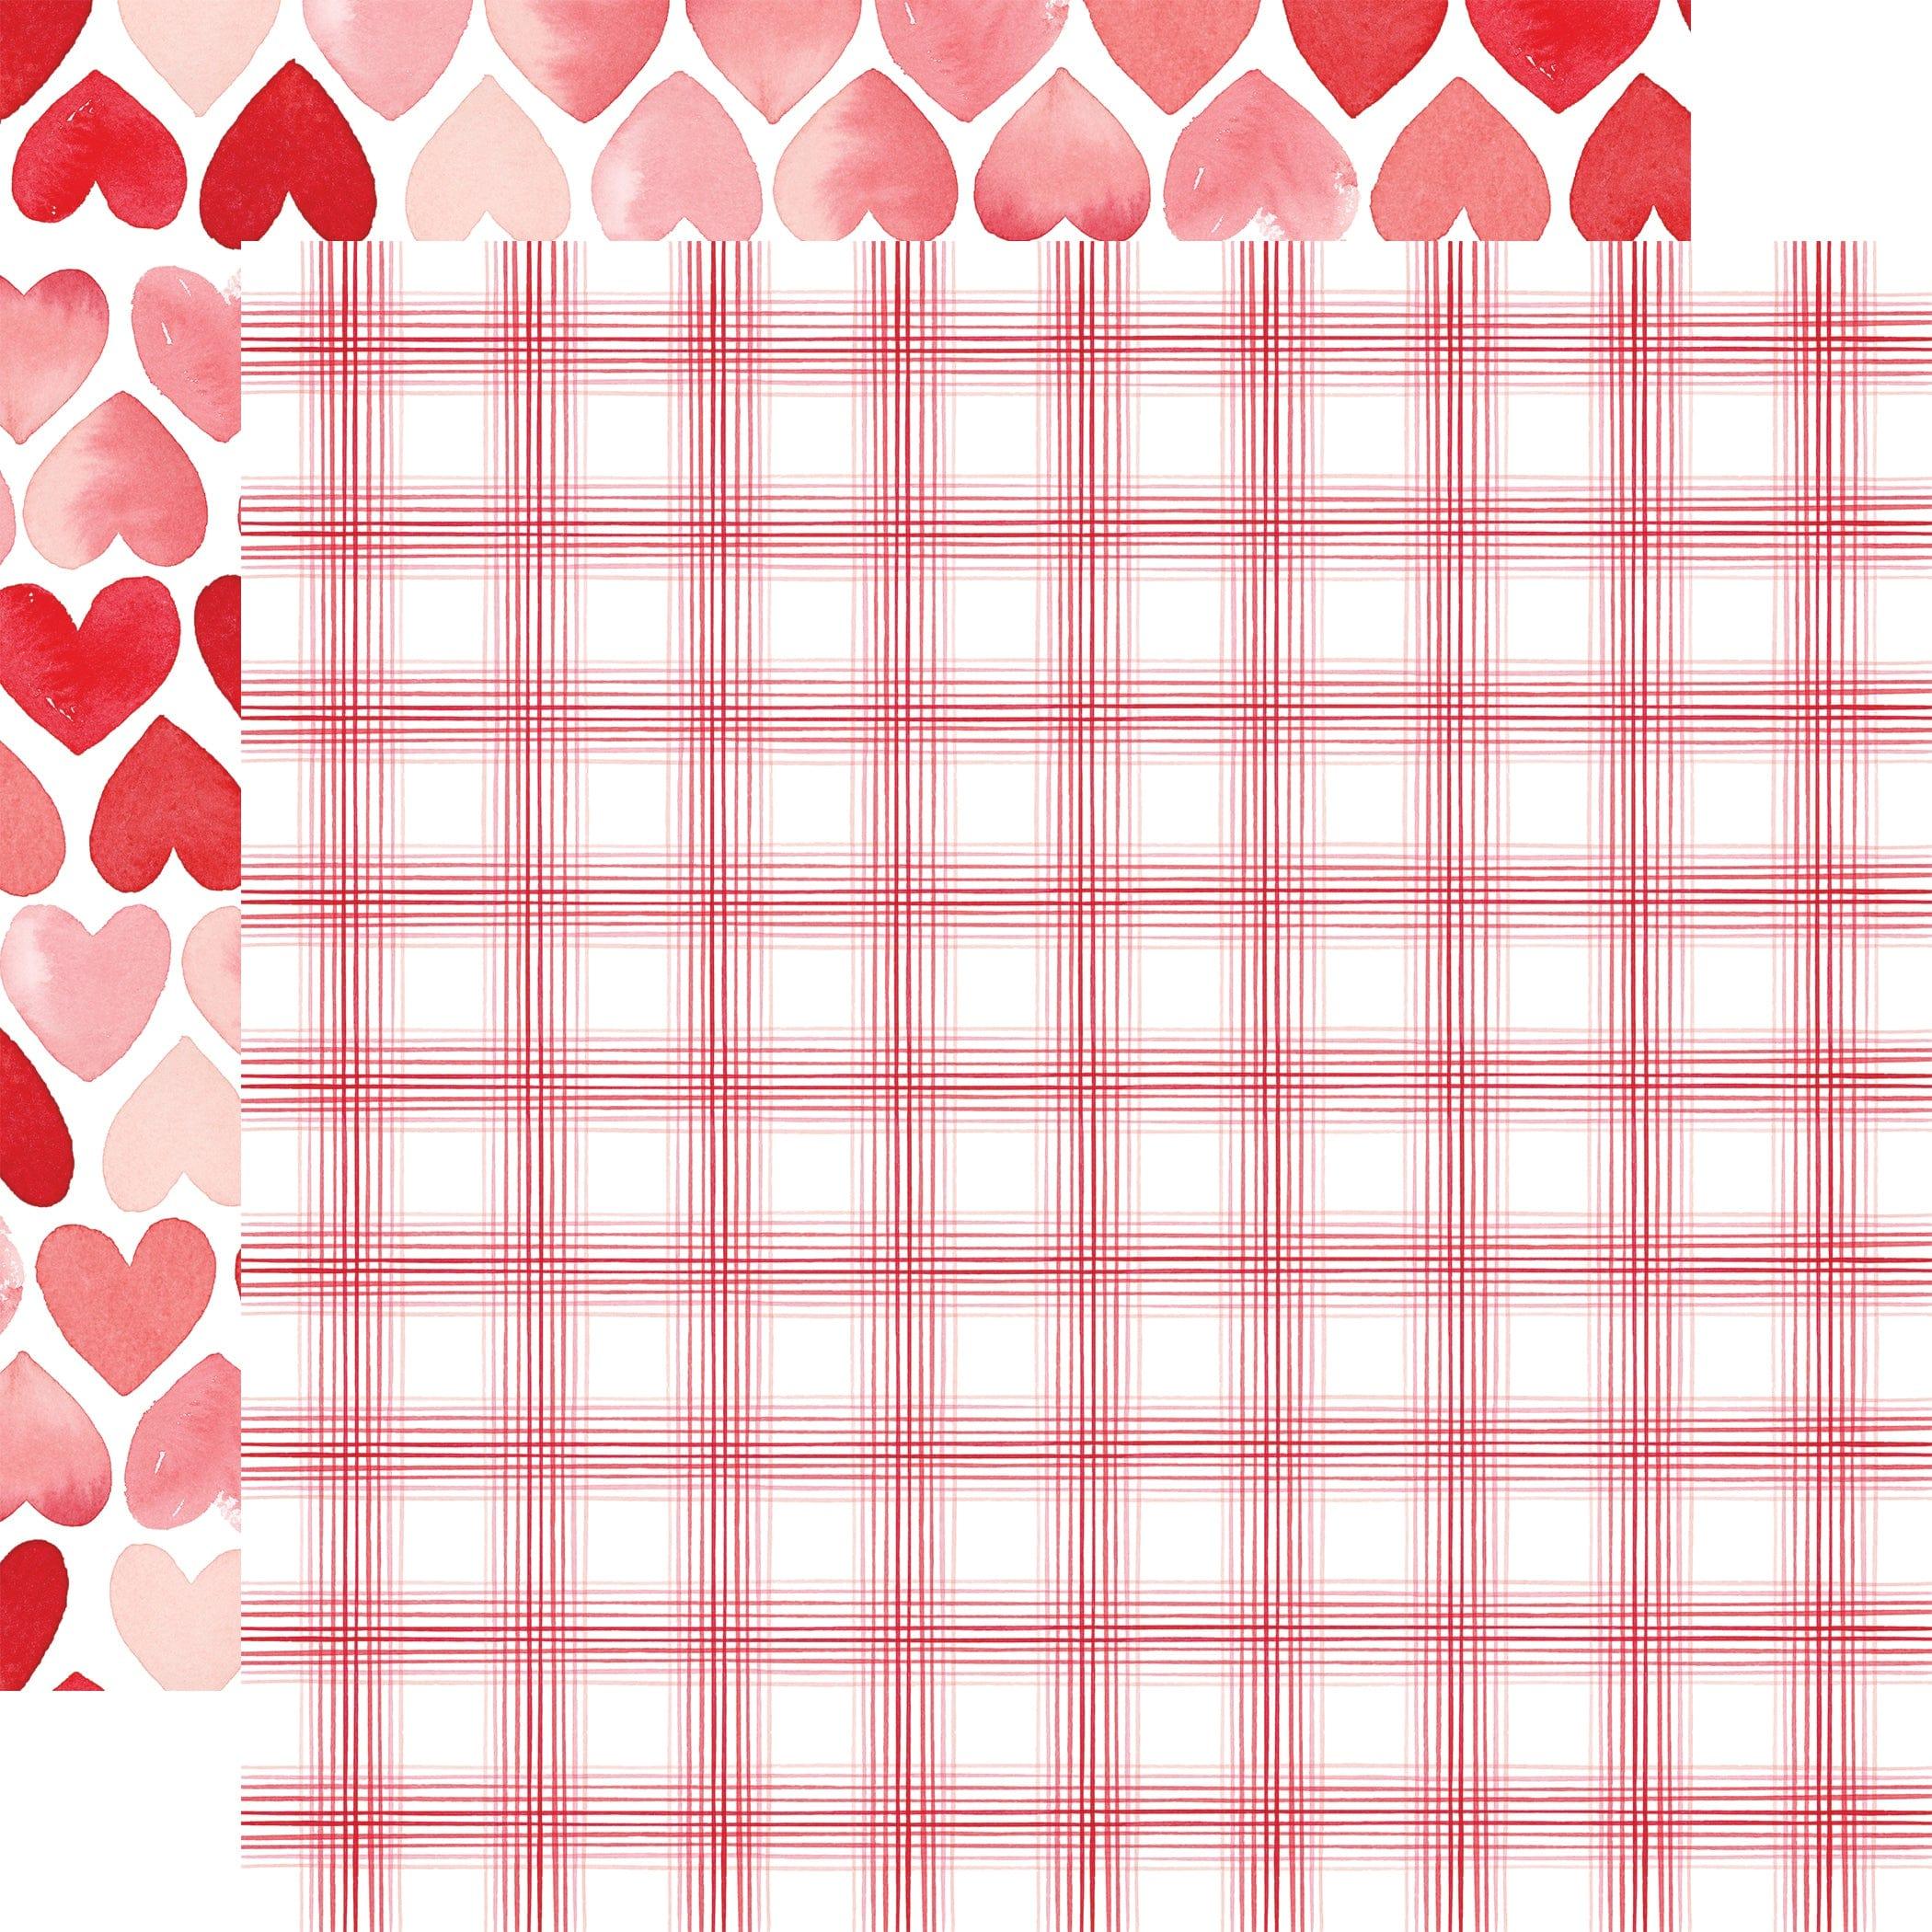 My Valentine Collection Sweetheart Plaid 12 x 12 Double-Sided Scrapbook Paper by Carta Bella - Scrapbook Supply Companies